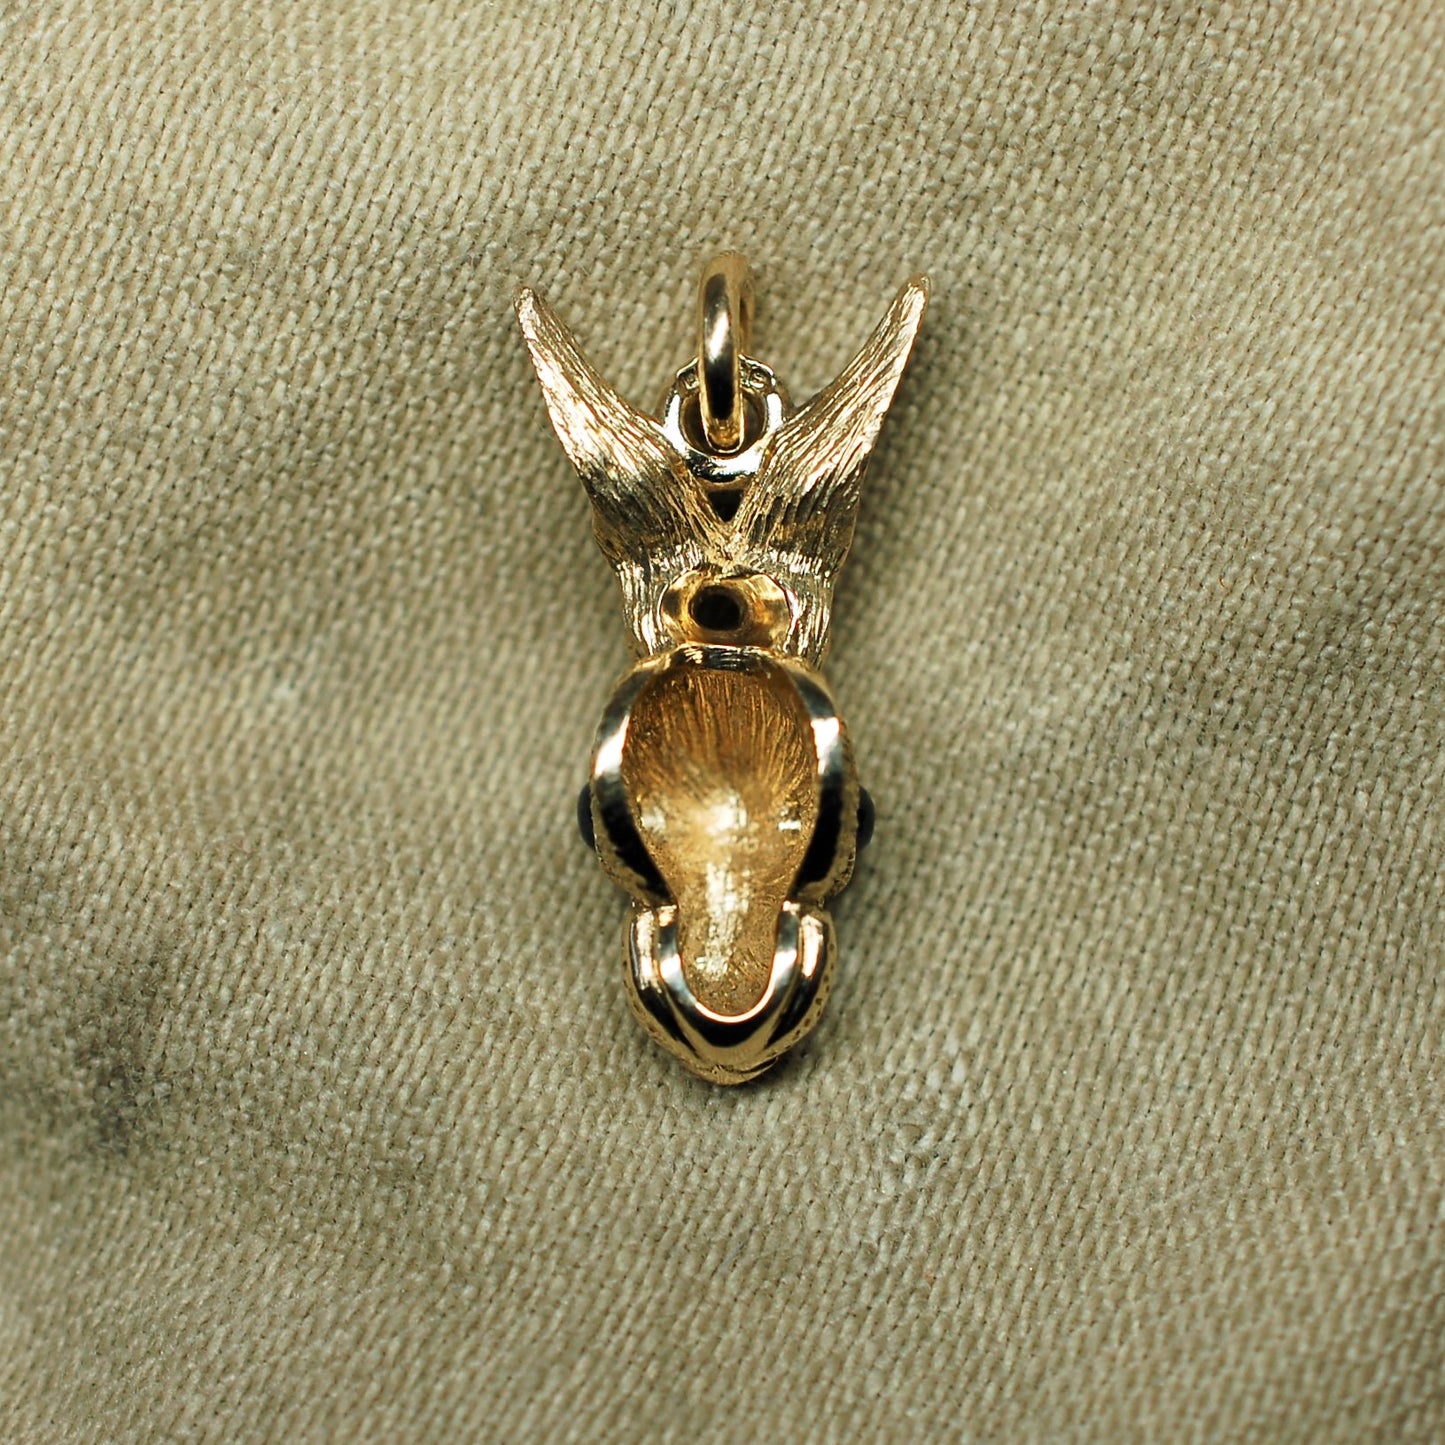 Gold rabbit necklace. Gold hare pendant with dark sapphire eyes and a gold chain. Hand made to order in the UK. © Adrian Ashley